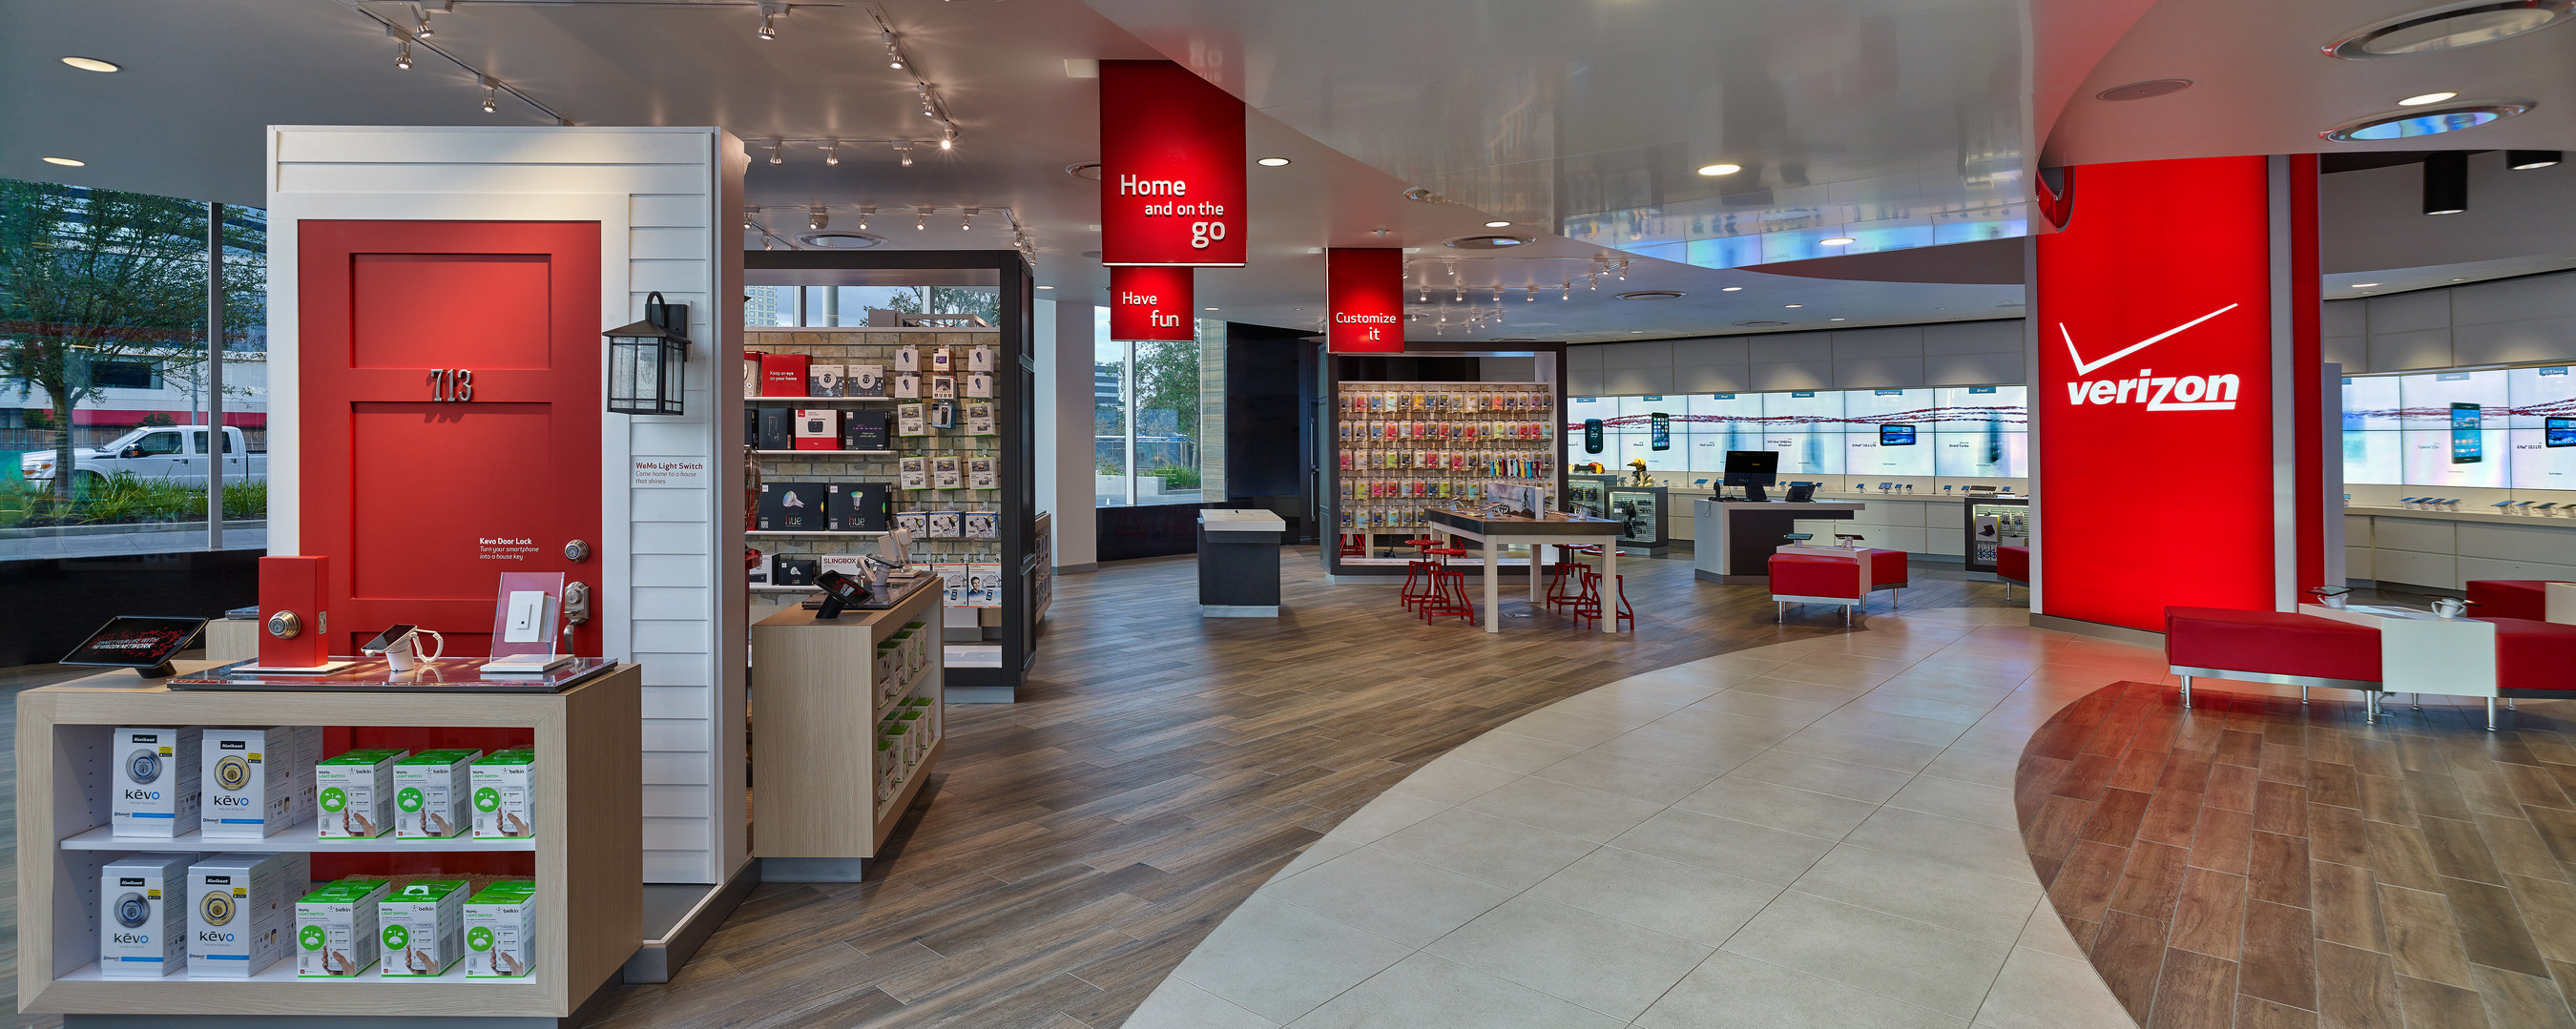 The Verizon Destination Store opened in Houston, Texas today at BLVD Place shopping center. Verizon is taking the retail experience to the next level with a new retail approach focusing on enhancing customers' mobile lifestyles. - (C) John W. Davis, ASMP, AIAP - DVDesign Group, Inc.